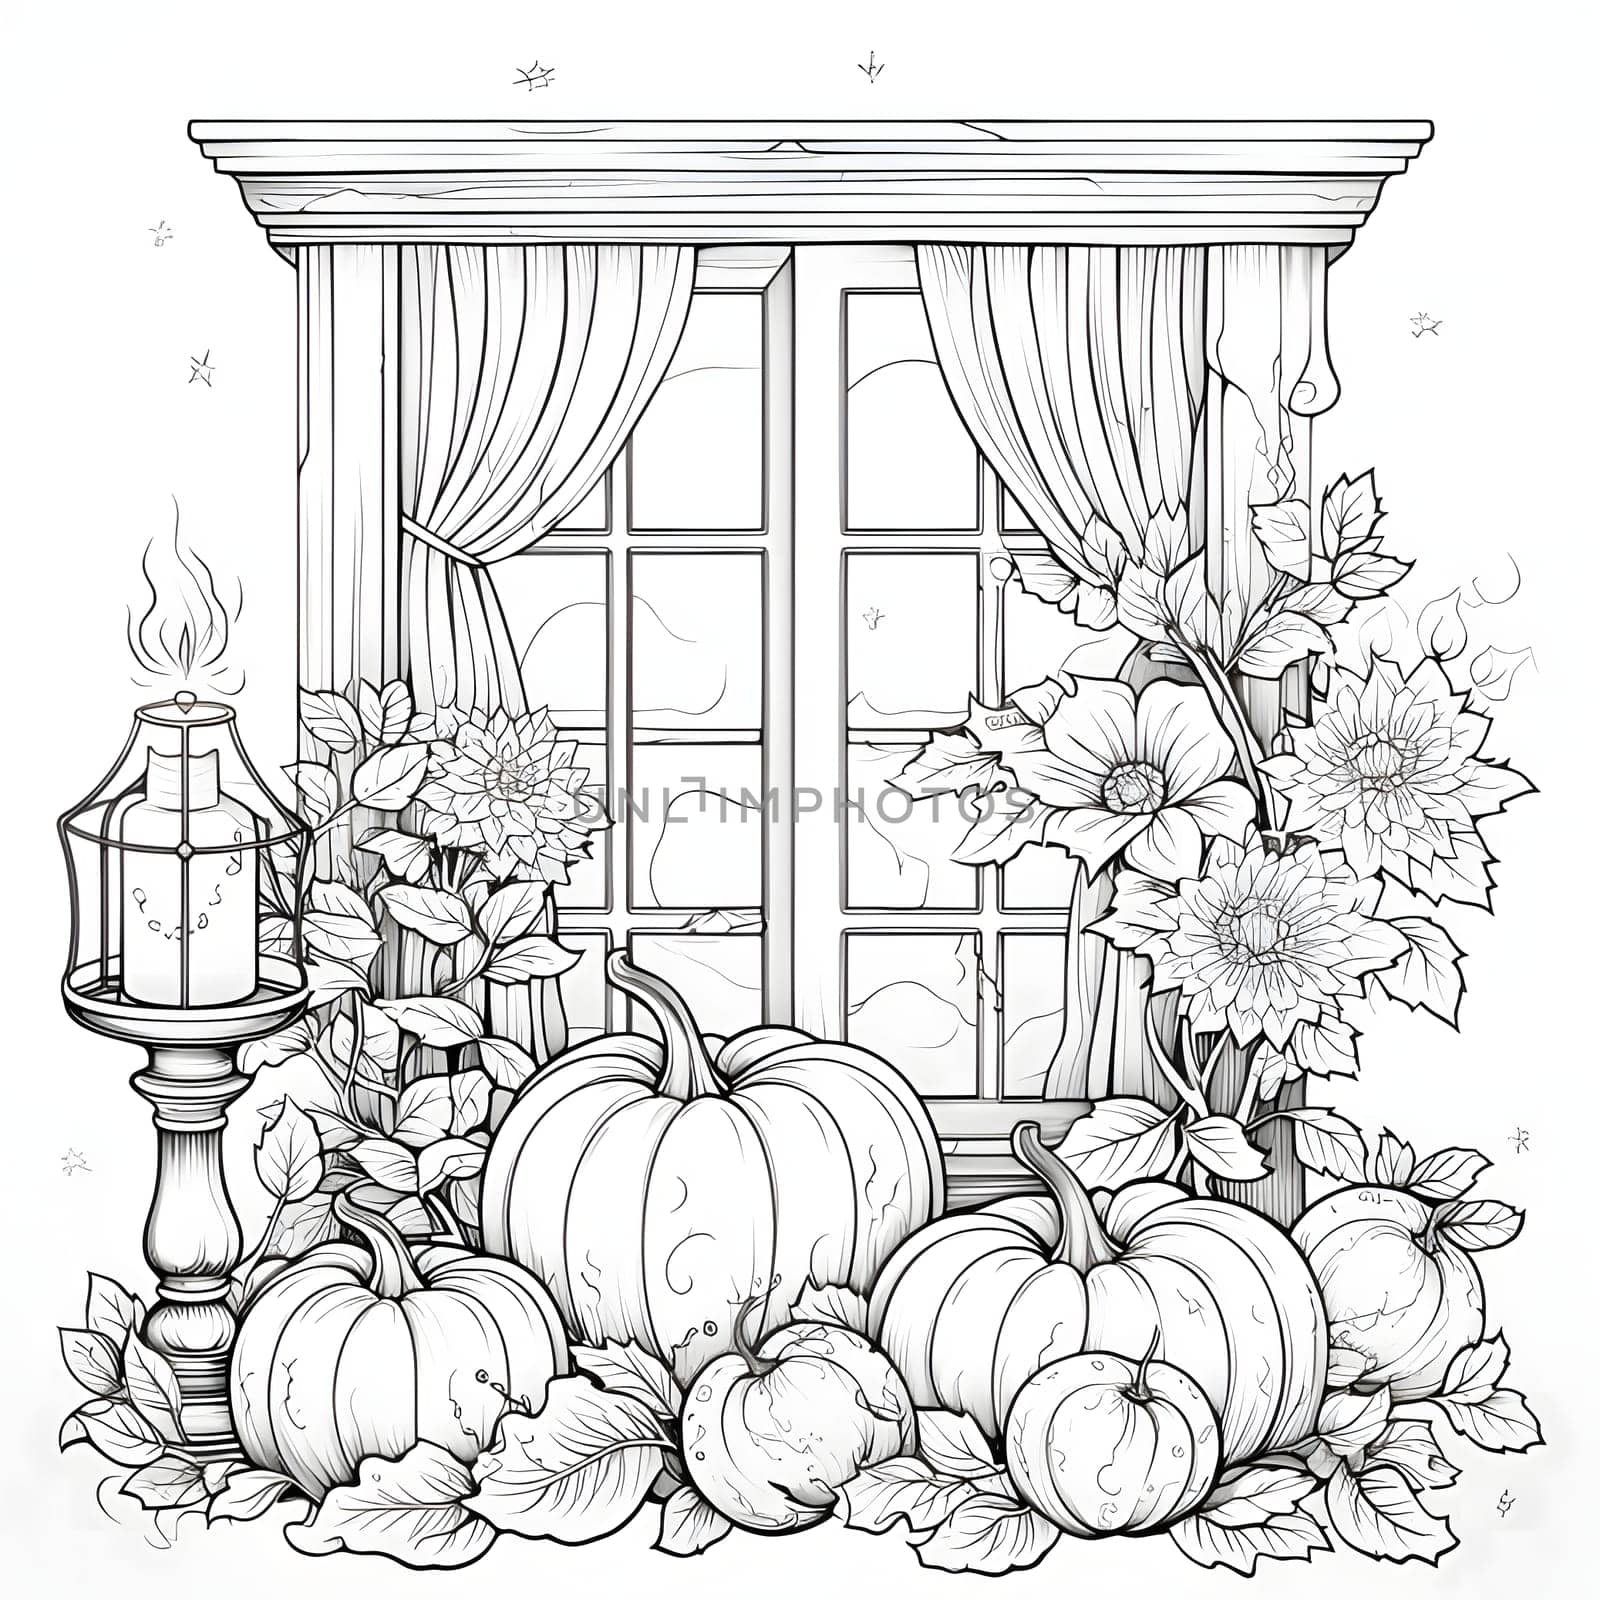 Black and White coloring book on it candles pumpkins flowers in the background window. Pumpkin as a dish of thanksgiving for the harvest, picture on a white isolated background. by ThemesS